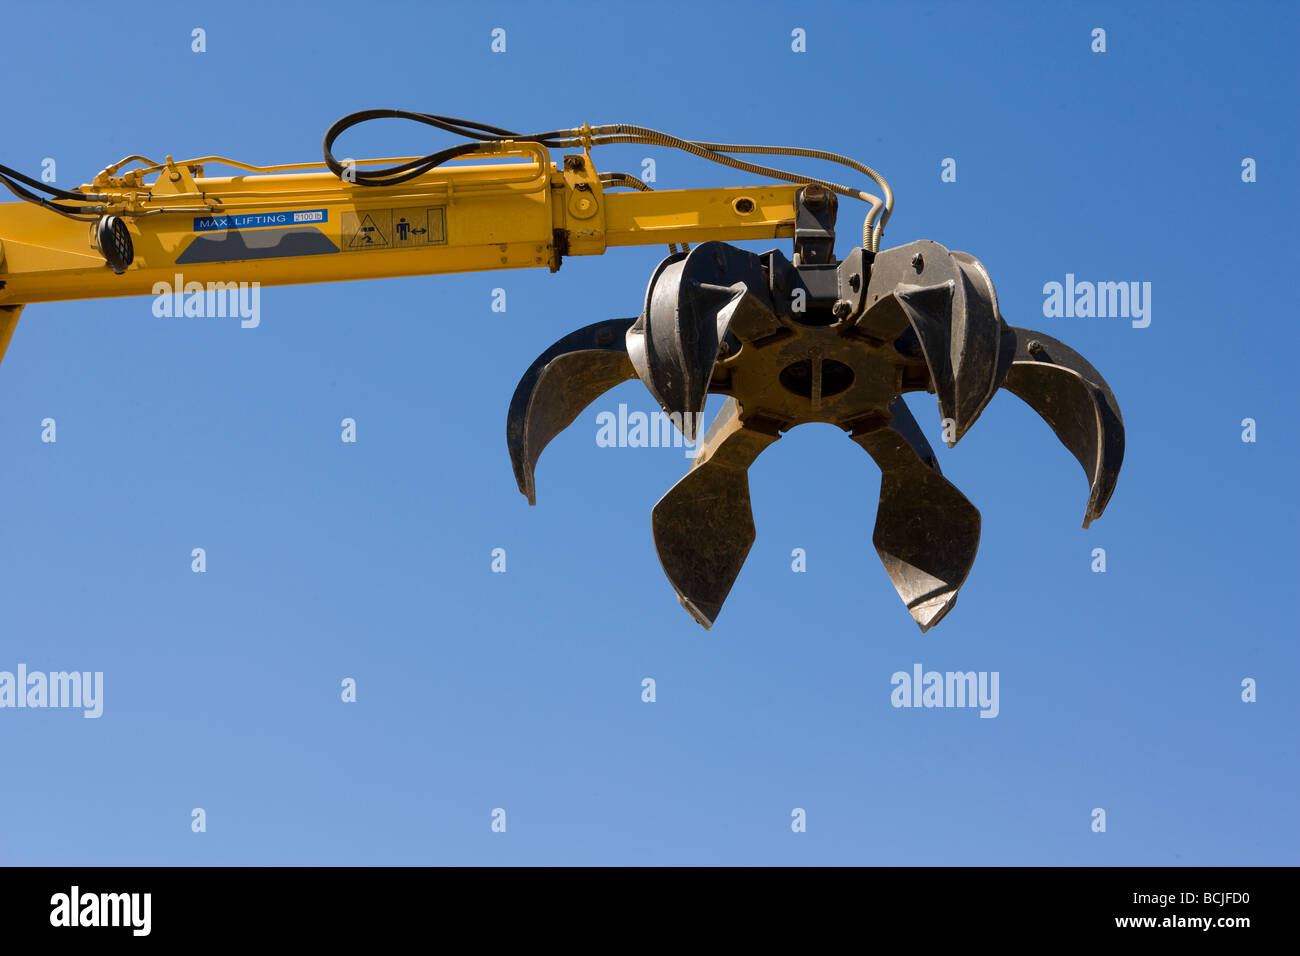 Claw of yellow mechanical machine used for picking up scrap metal at recylcing yard against blue sky Indio California USA Stock Photo